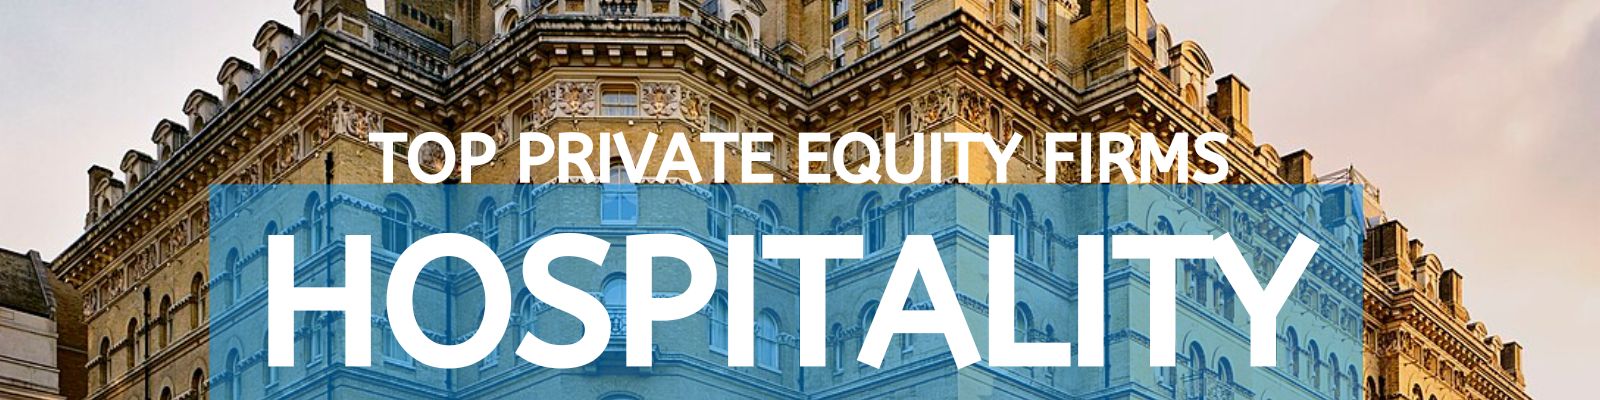 top hospitality private equity firms hospitality private equity hospitality hotel private equity hotel hospitality investment firms best hotel private equity firms top hotel private equity funds biggest hotel private equity firms dt